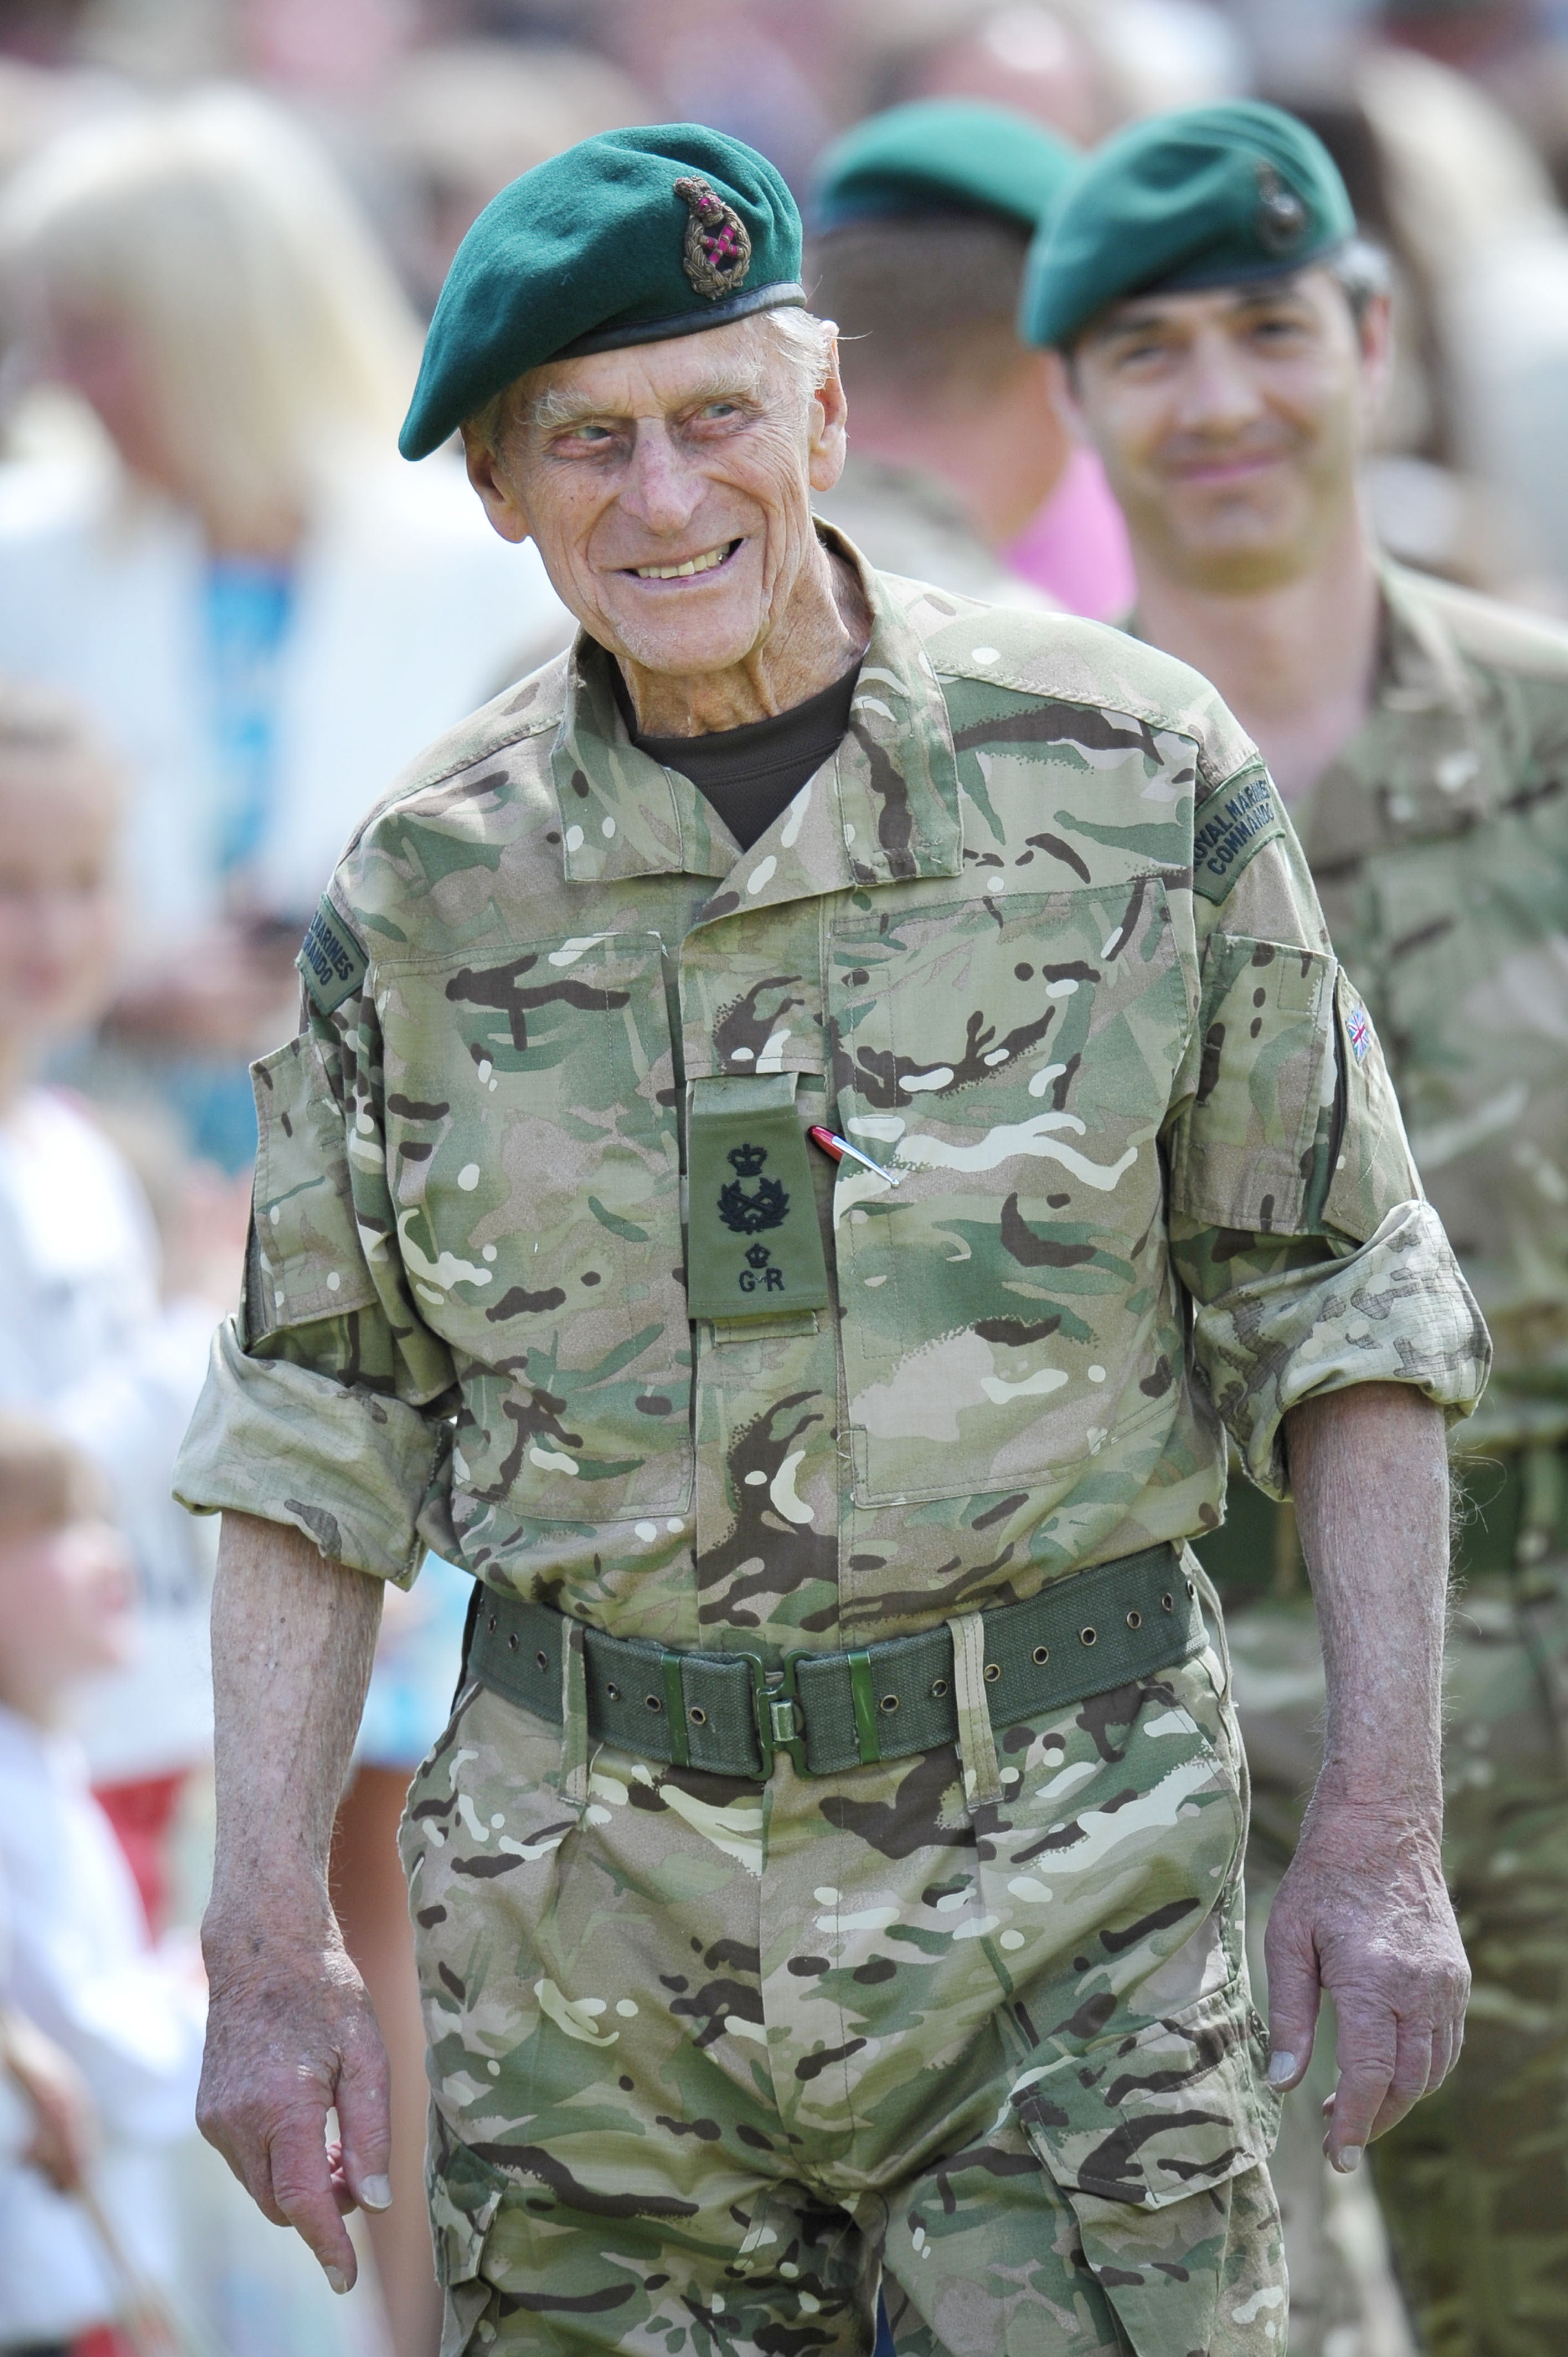 Prince Philip in 2013 awarding Afghanistan service medals at 40 Commando in Taunton.